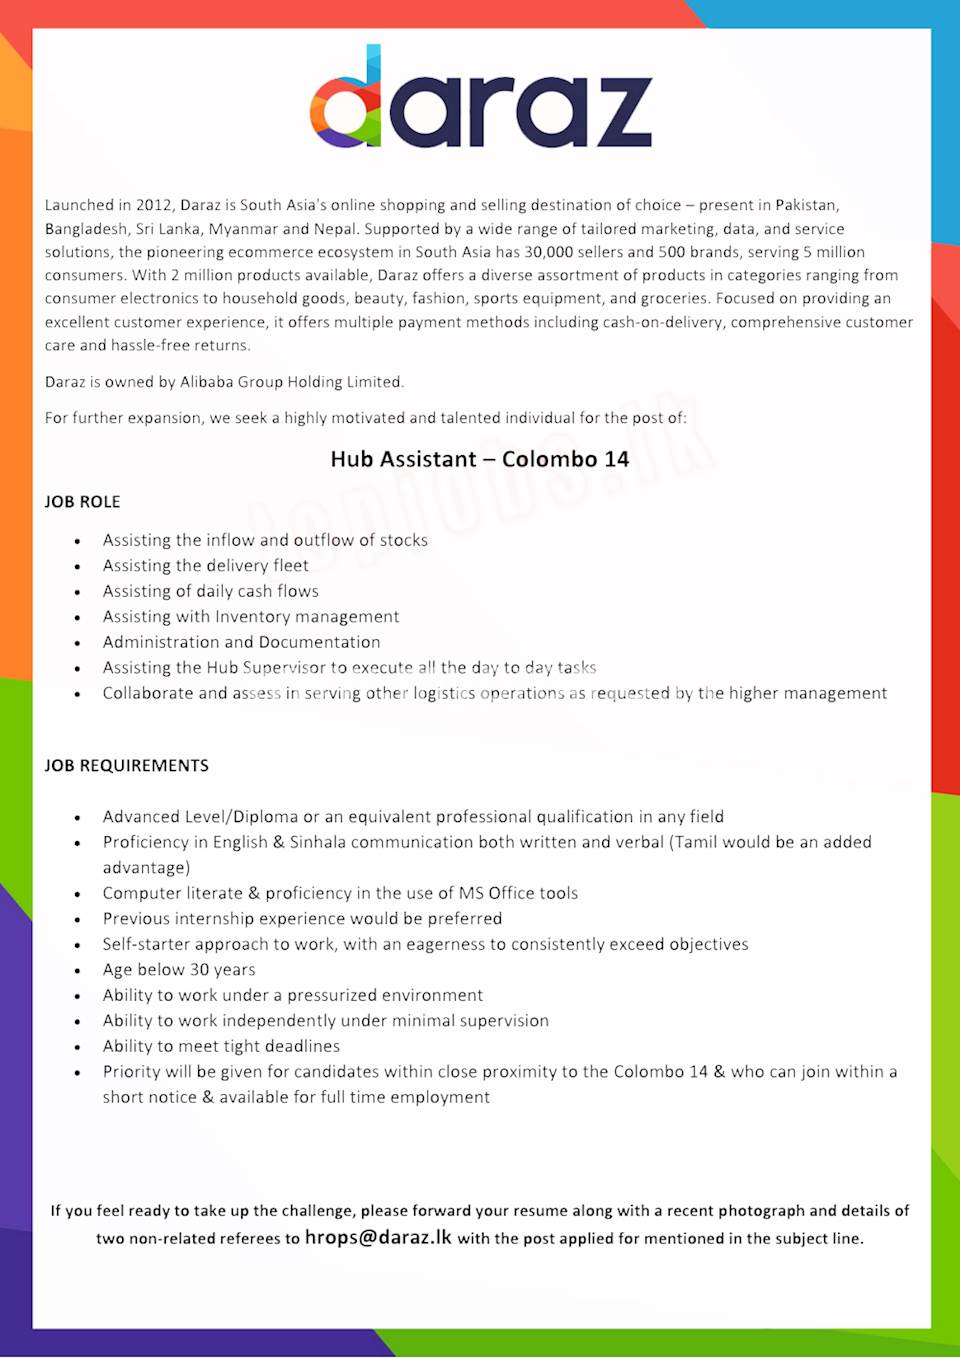 Hub Assistant - Colombo 14